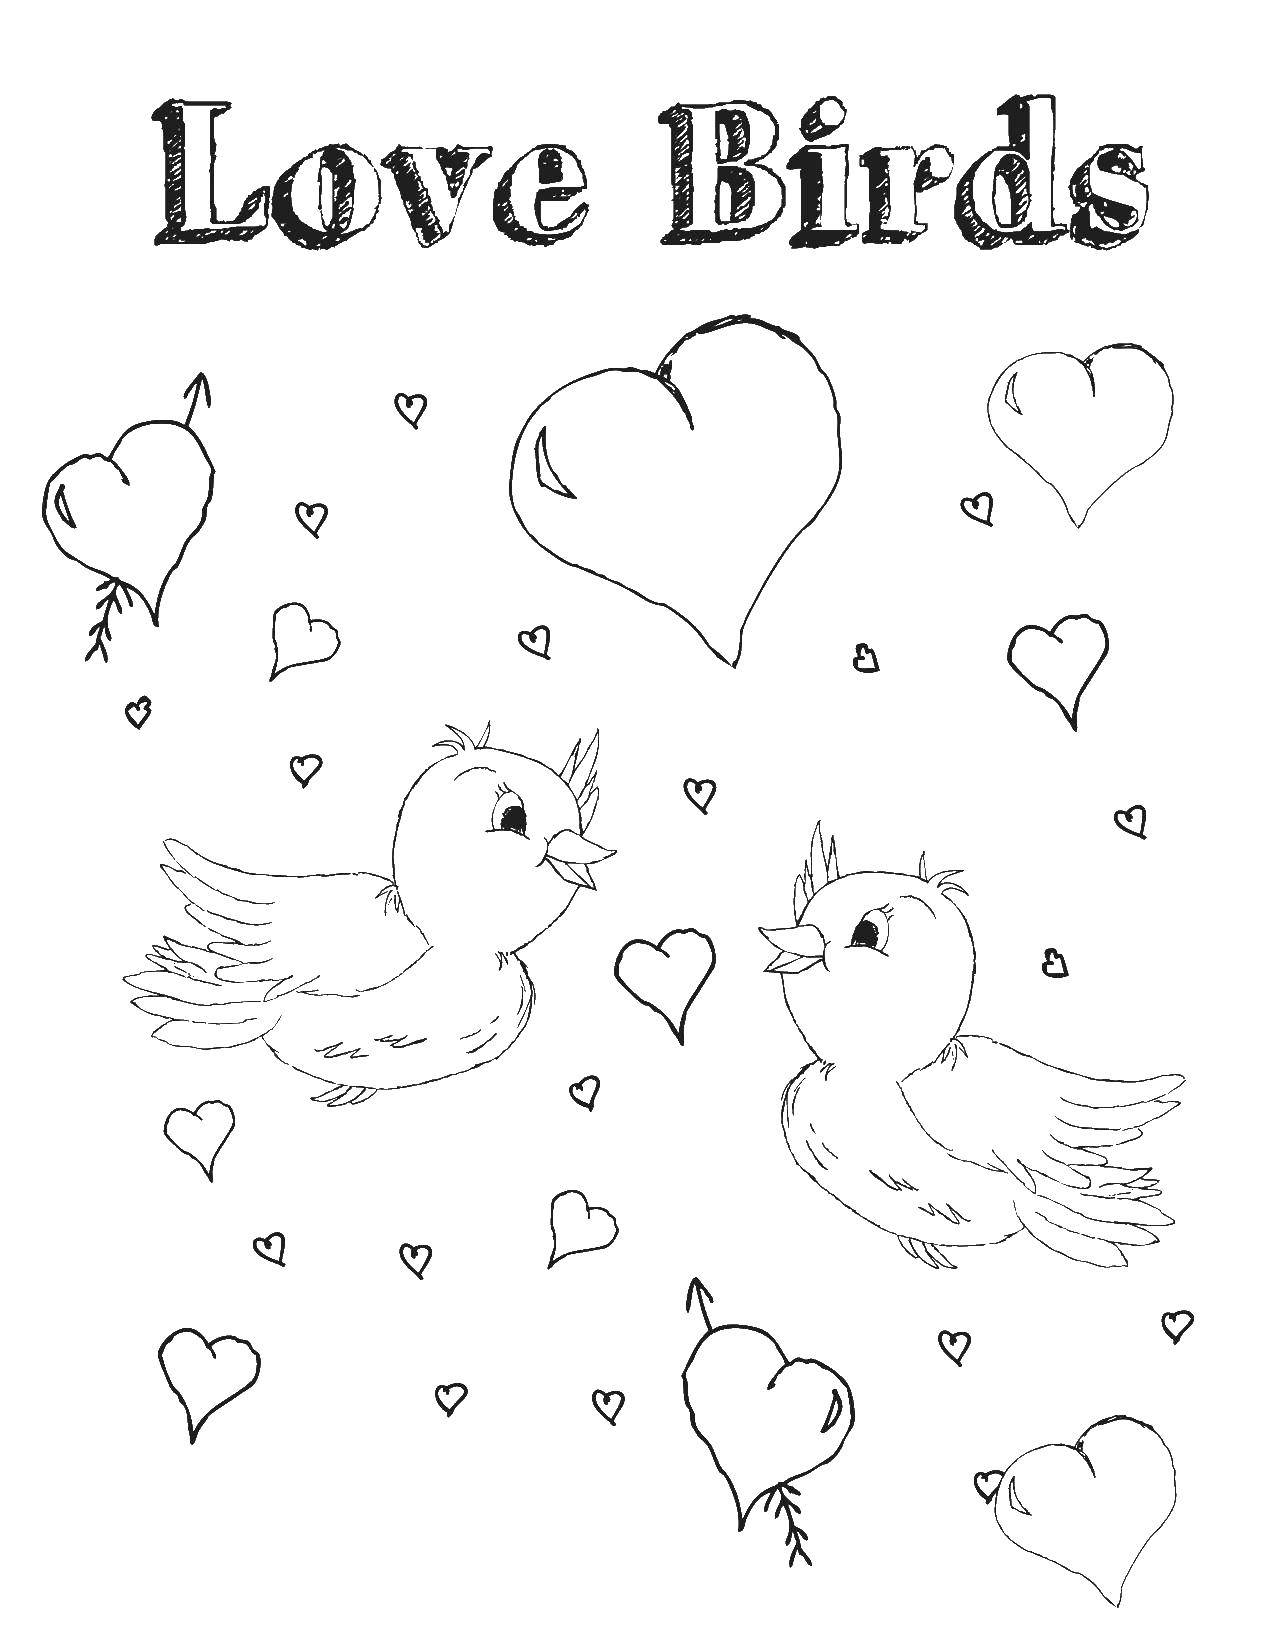 Coloring Two birds. Category Valentines day. Tags:  birds, hearts.